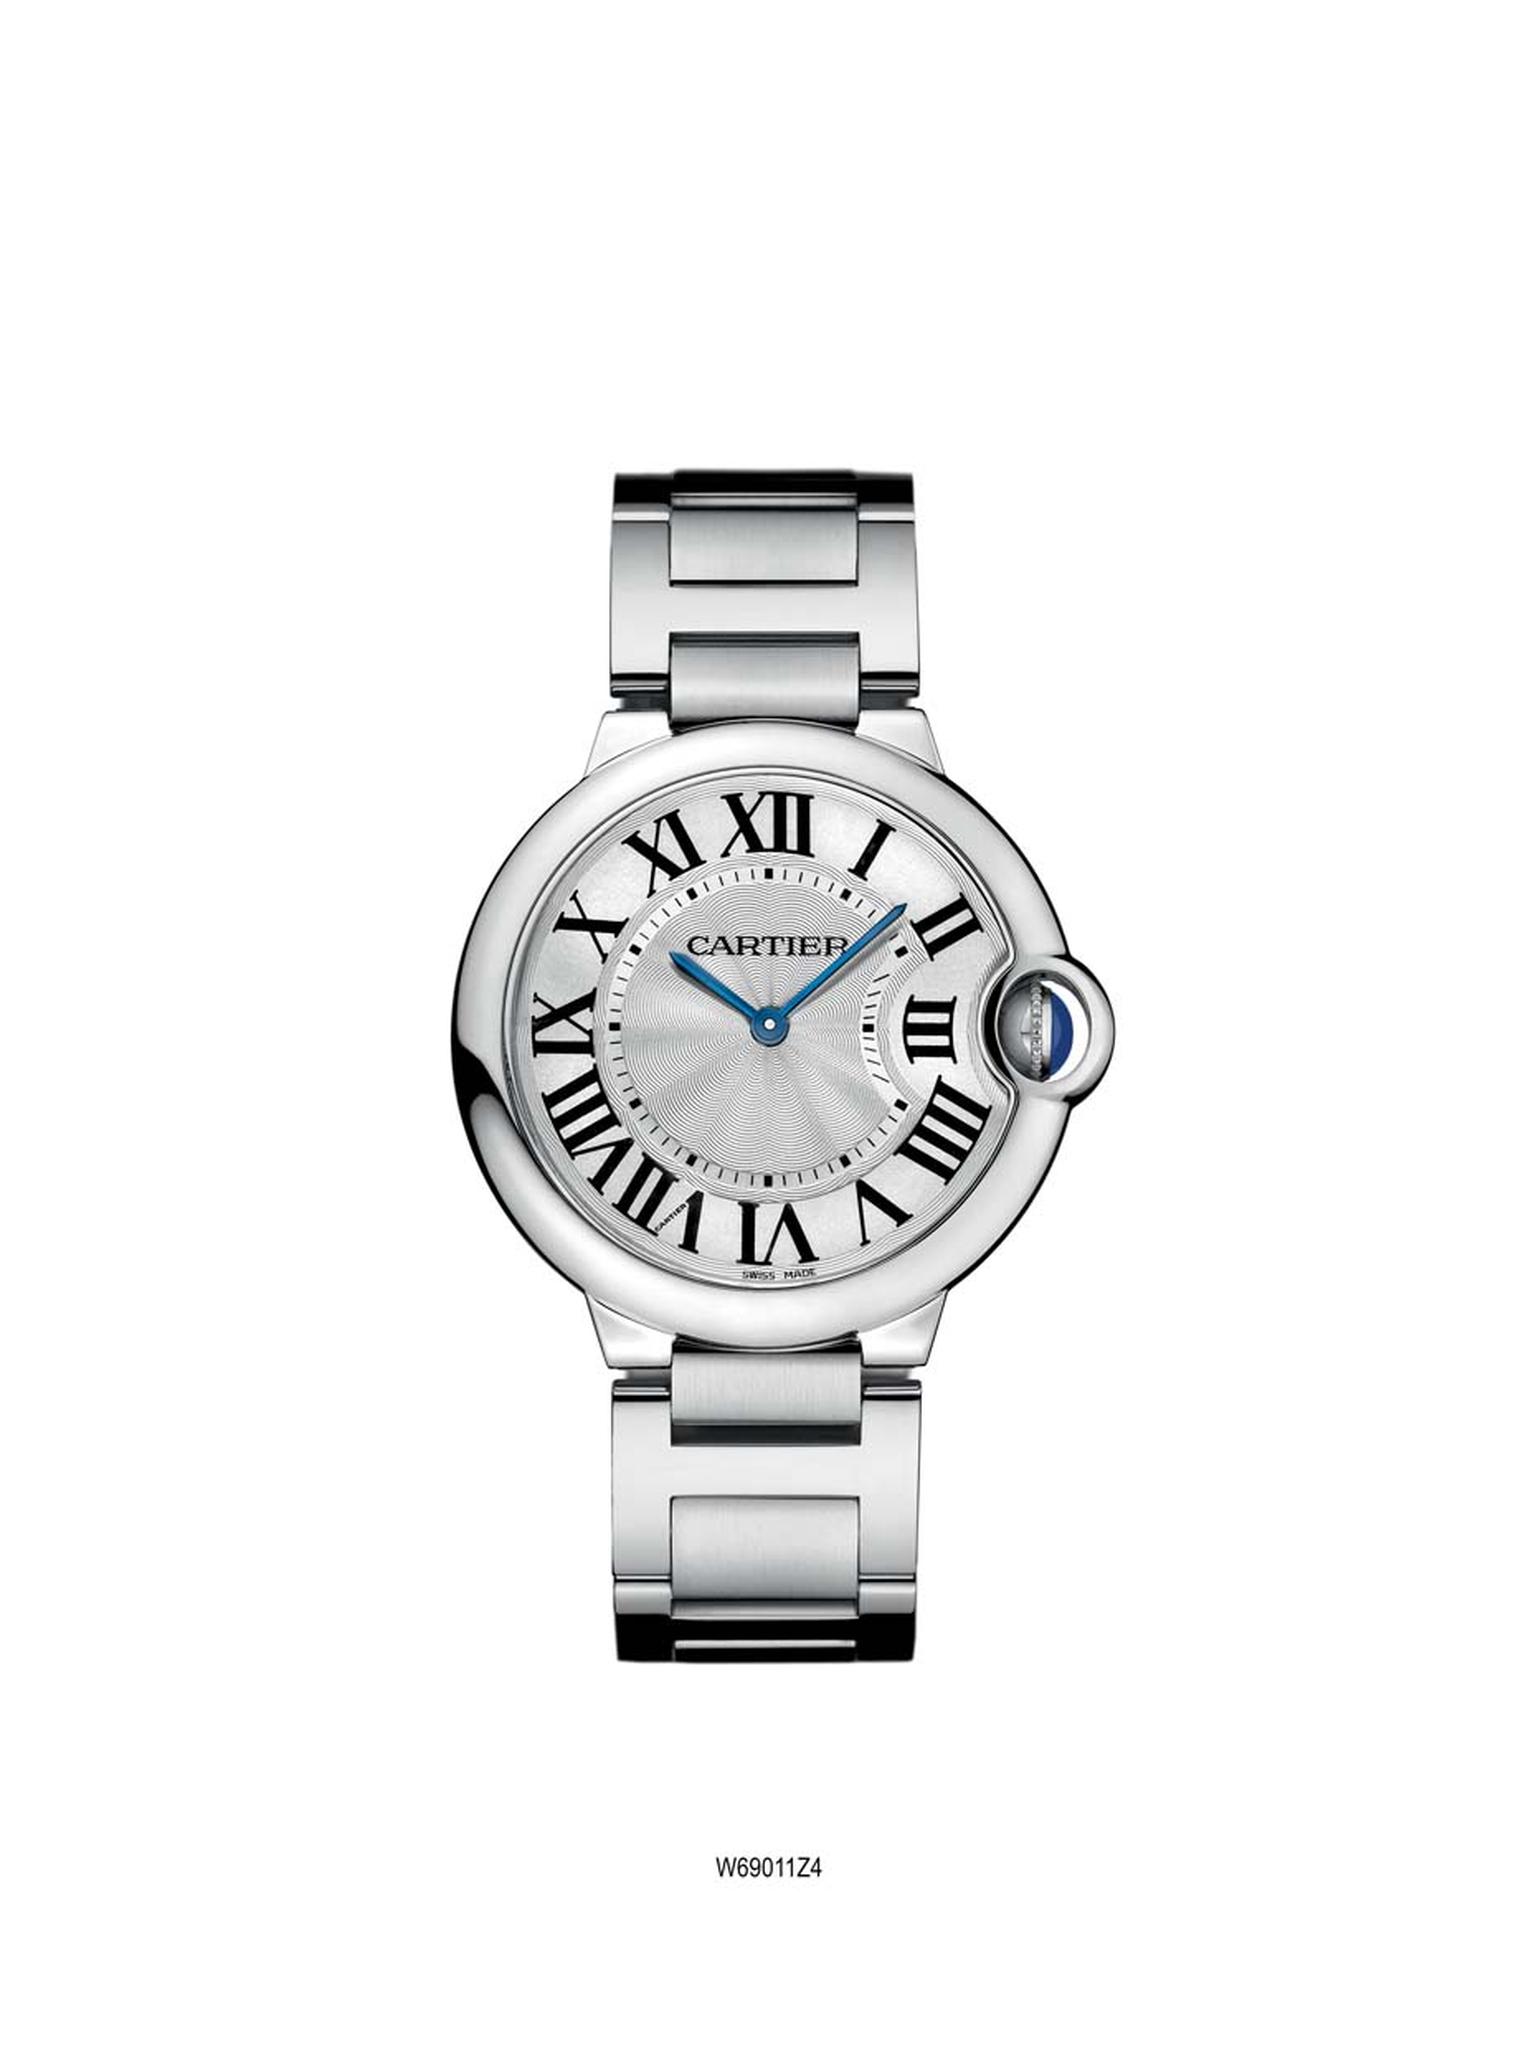 The Ballon Blue de Cartier, released in 2007, in stainless steel features a guilloché dial with large Roman numerals (£3,850).